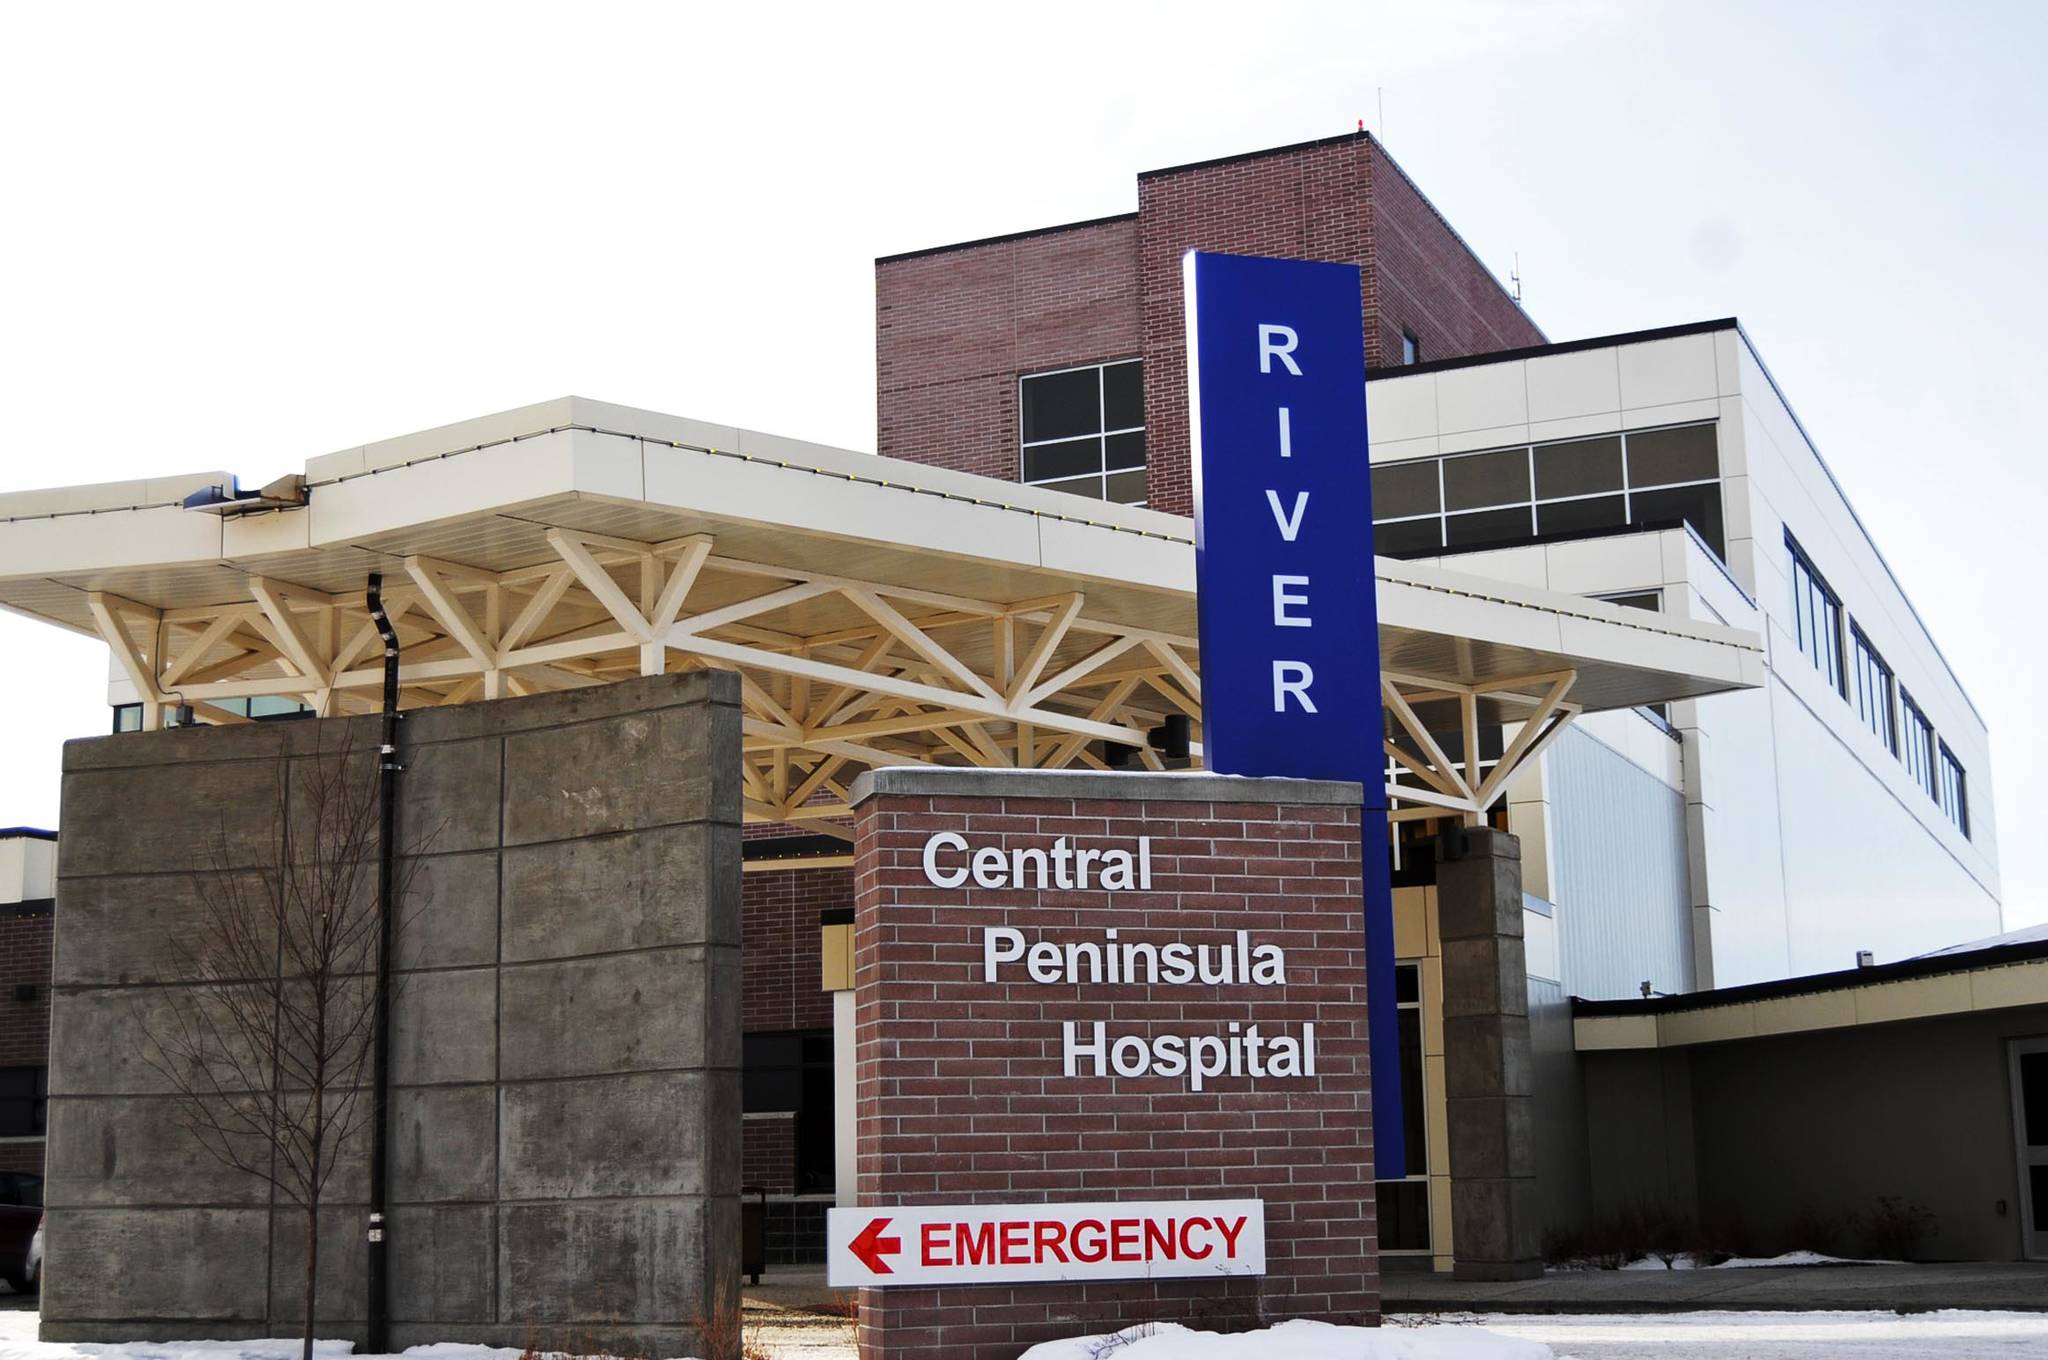 This March 29, 2017 photo shows Central Peninsula Hospital’s River Tower, which houses specialty medical services, in Soldotna, Alaska. The tower was completed in January 2017 as part of a multi-year service and infrastructure expansion at the hospital. (Elizabeth Earl/Peninsula Clarion)